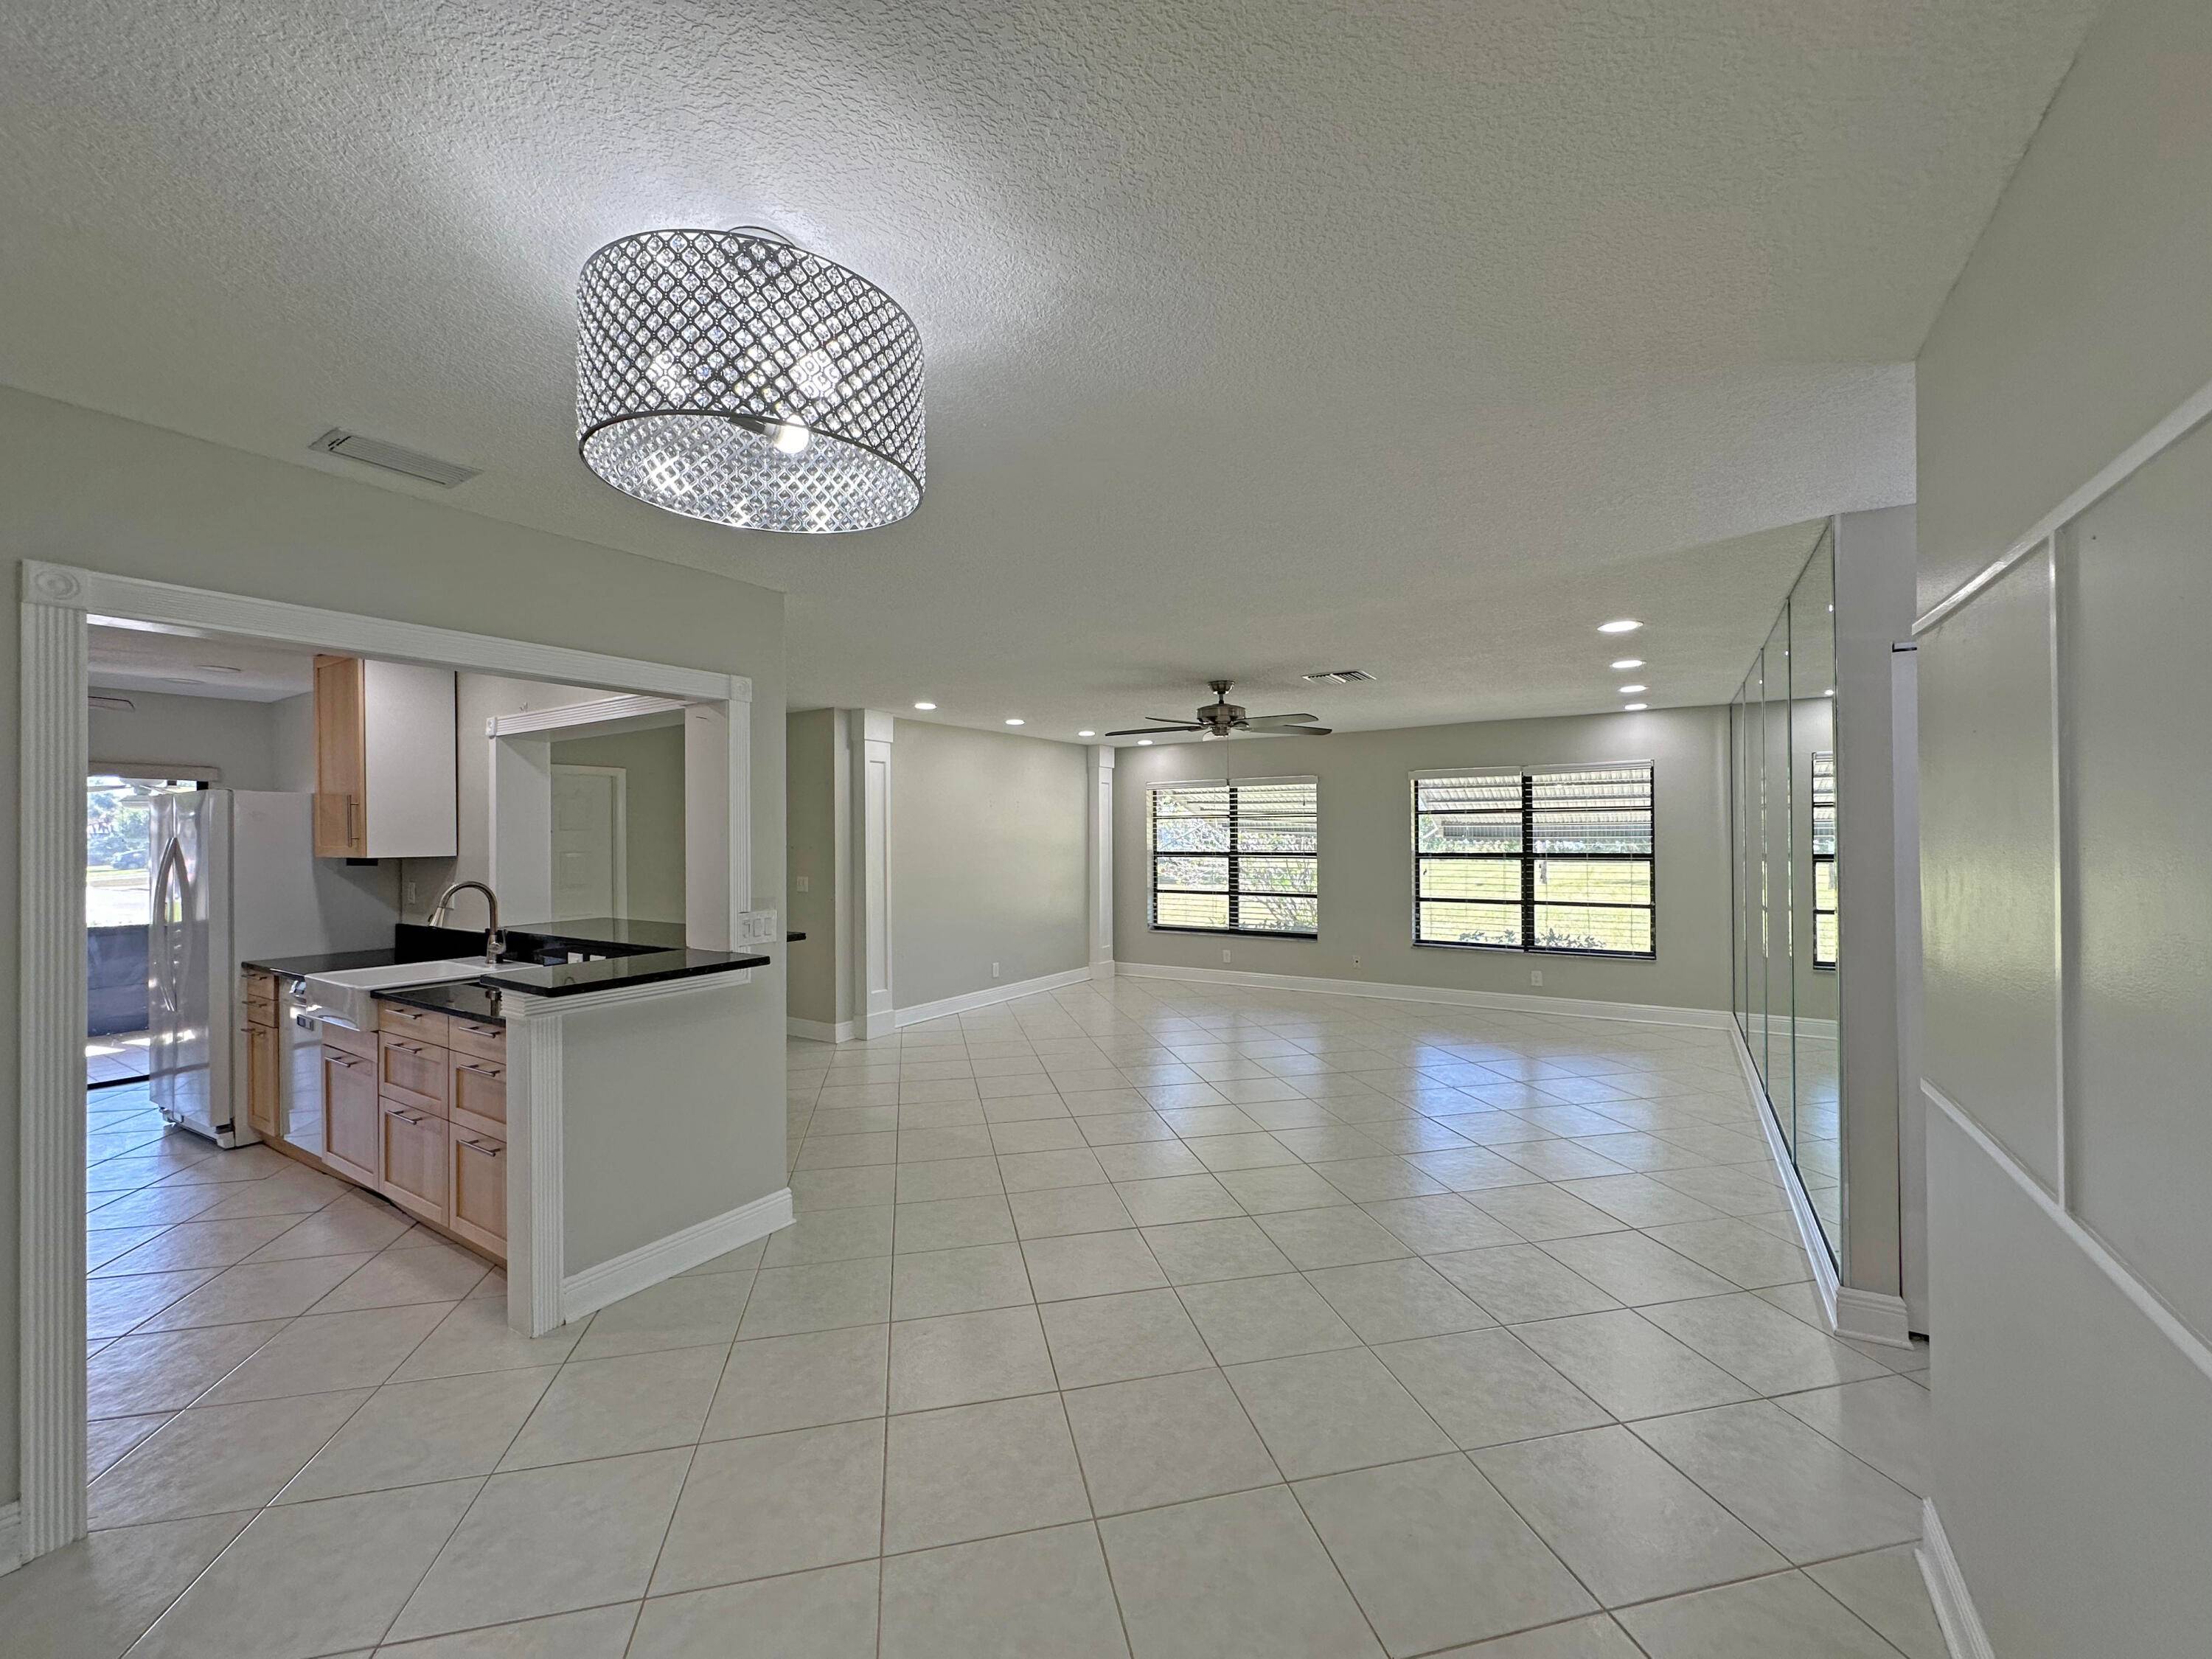 Motivated seller ! Unit will also have impact hurricane glass windows installed throughout unit stainless steel appliances before sale is complete.